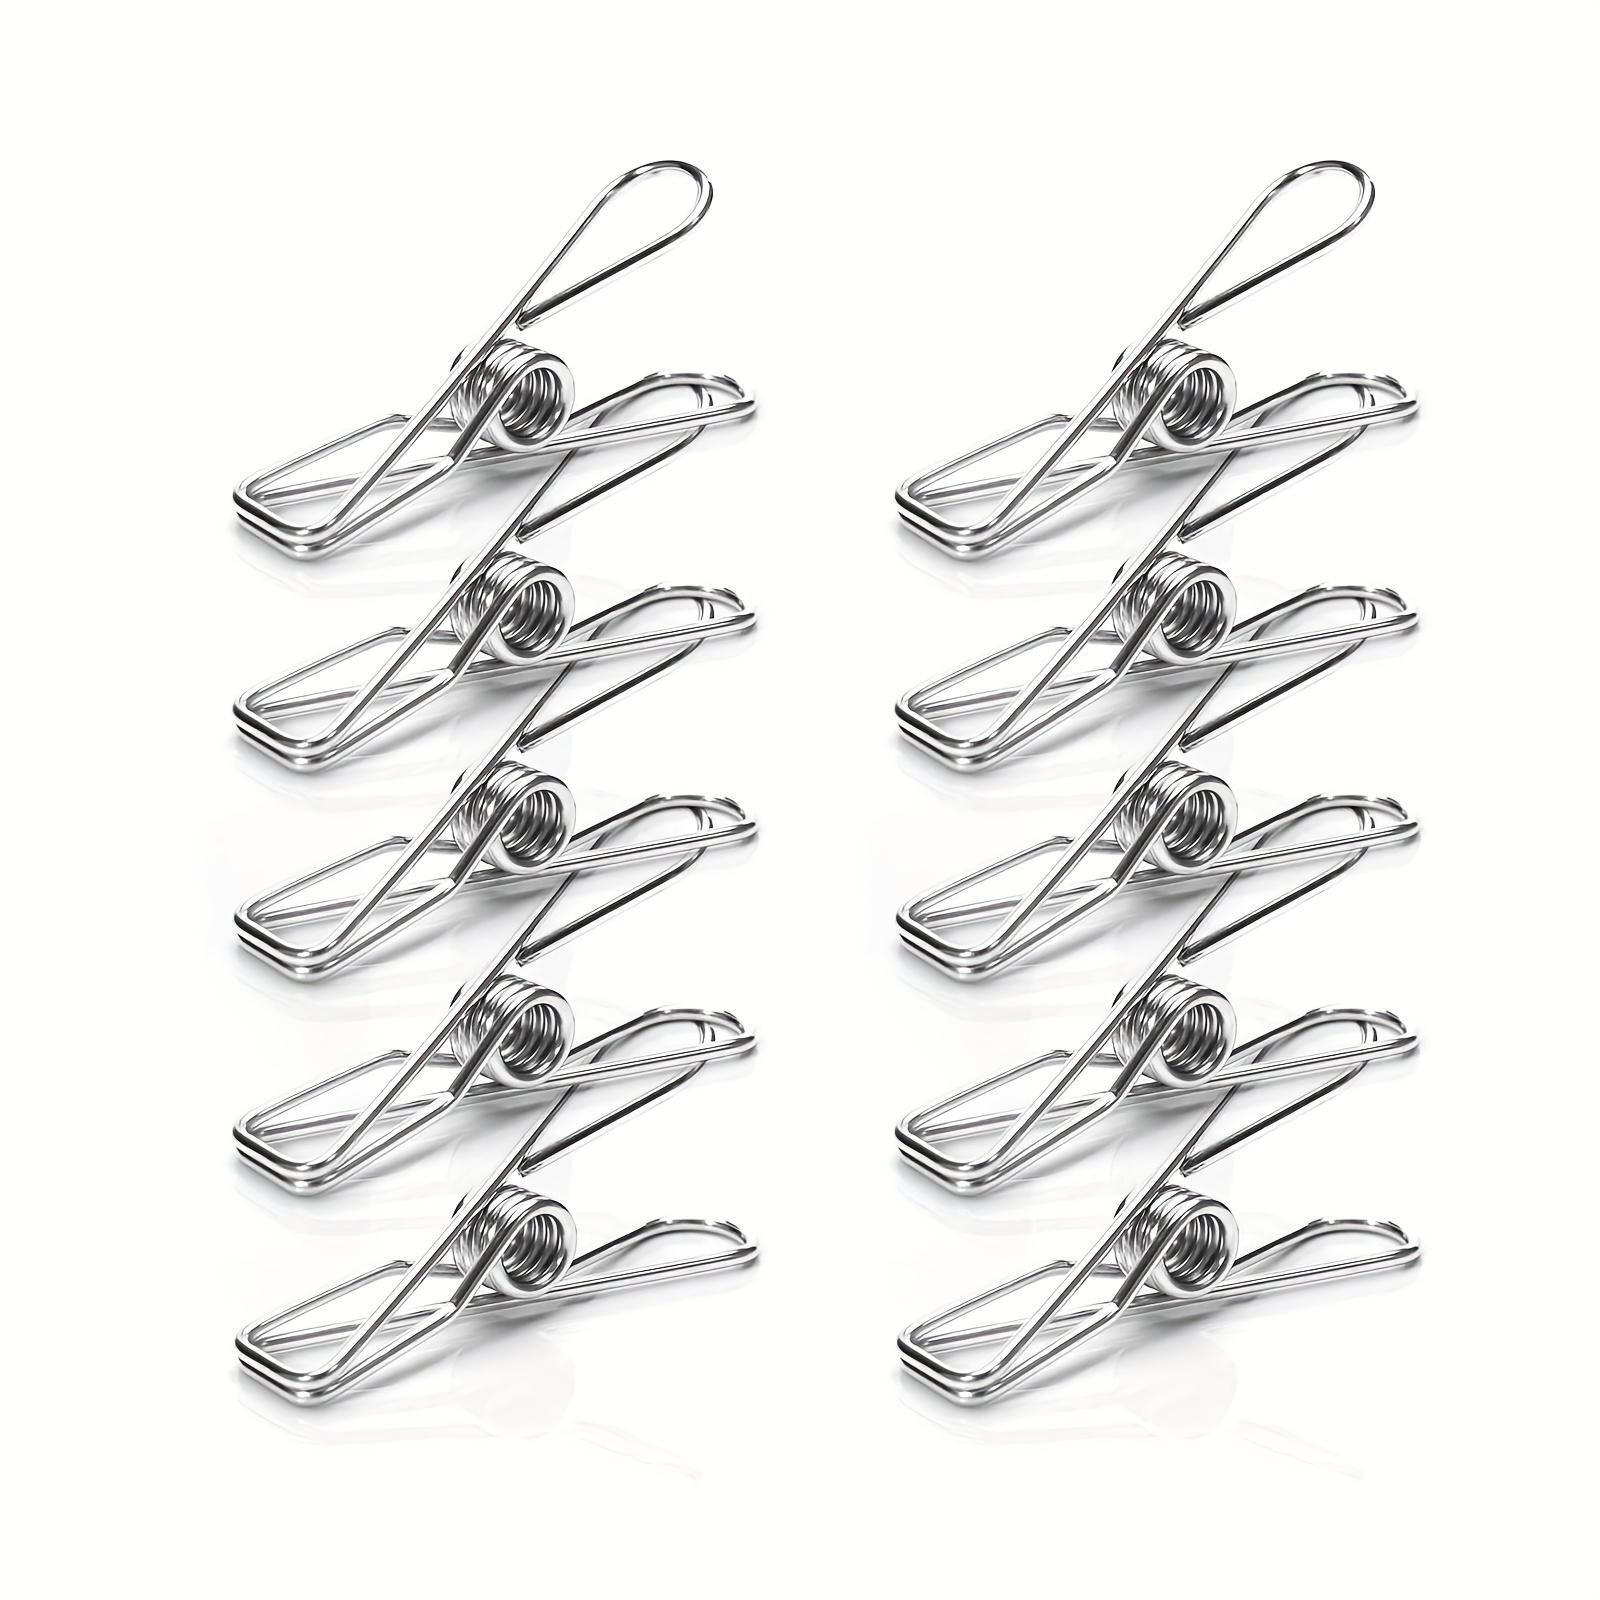 Home-X 10 Pack Stainless Steel Clothespin & Utility Clip Multi-Purpose  Stainless Steel Clips, Cord Clothes Pins Utility Clips Clamps Darkroom